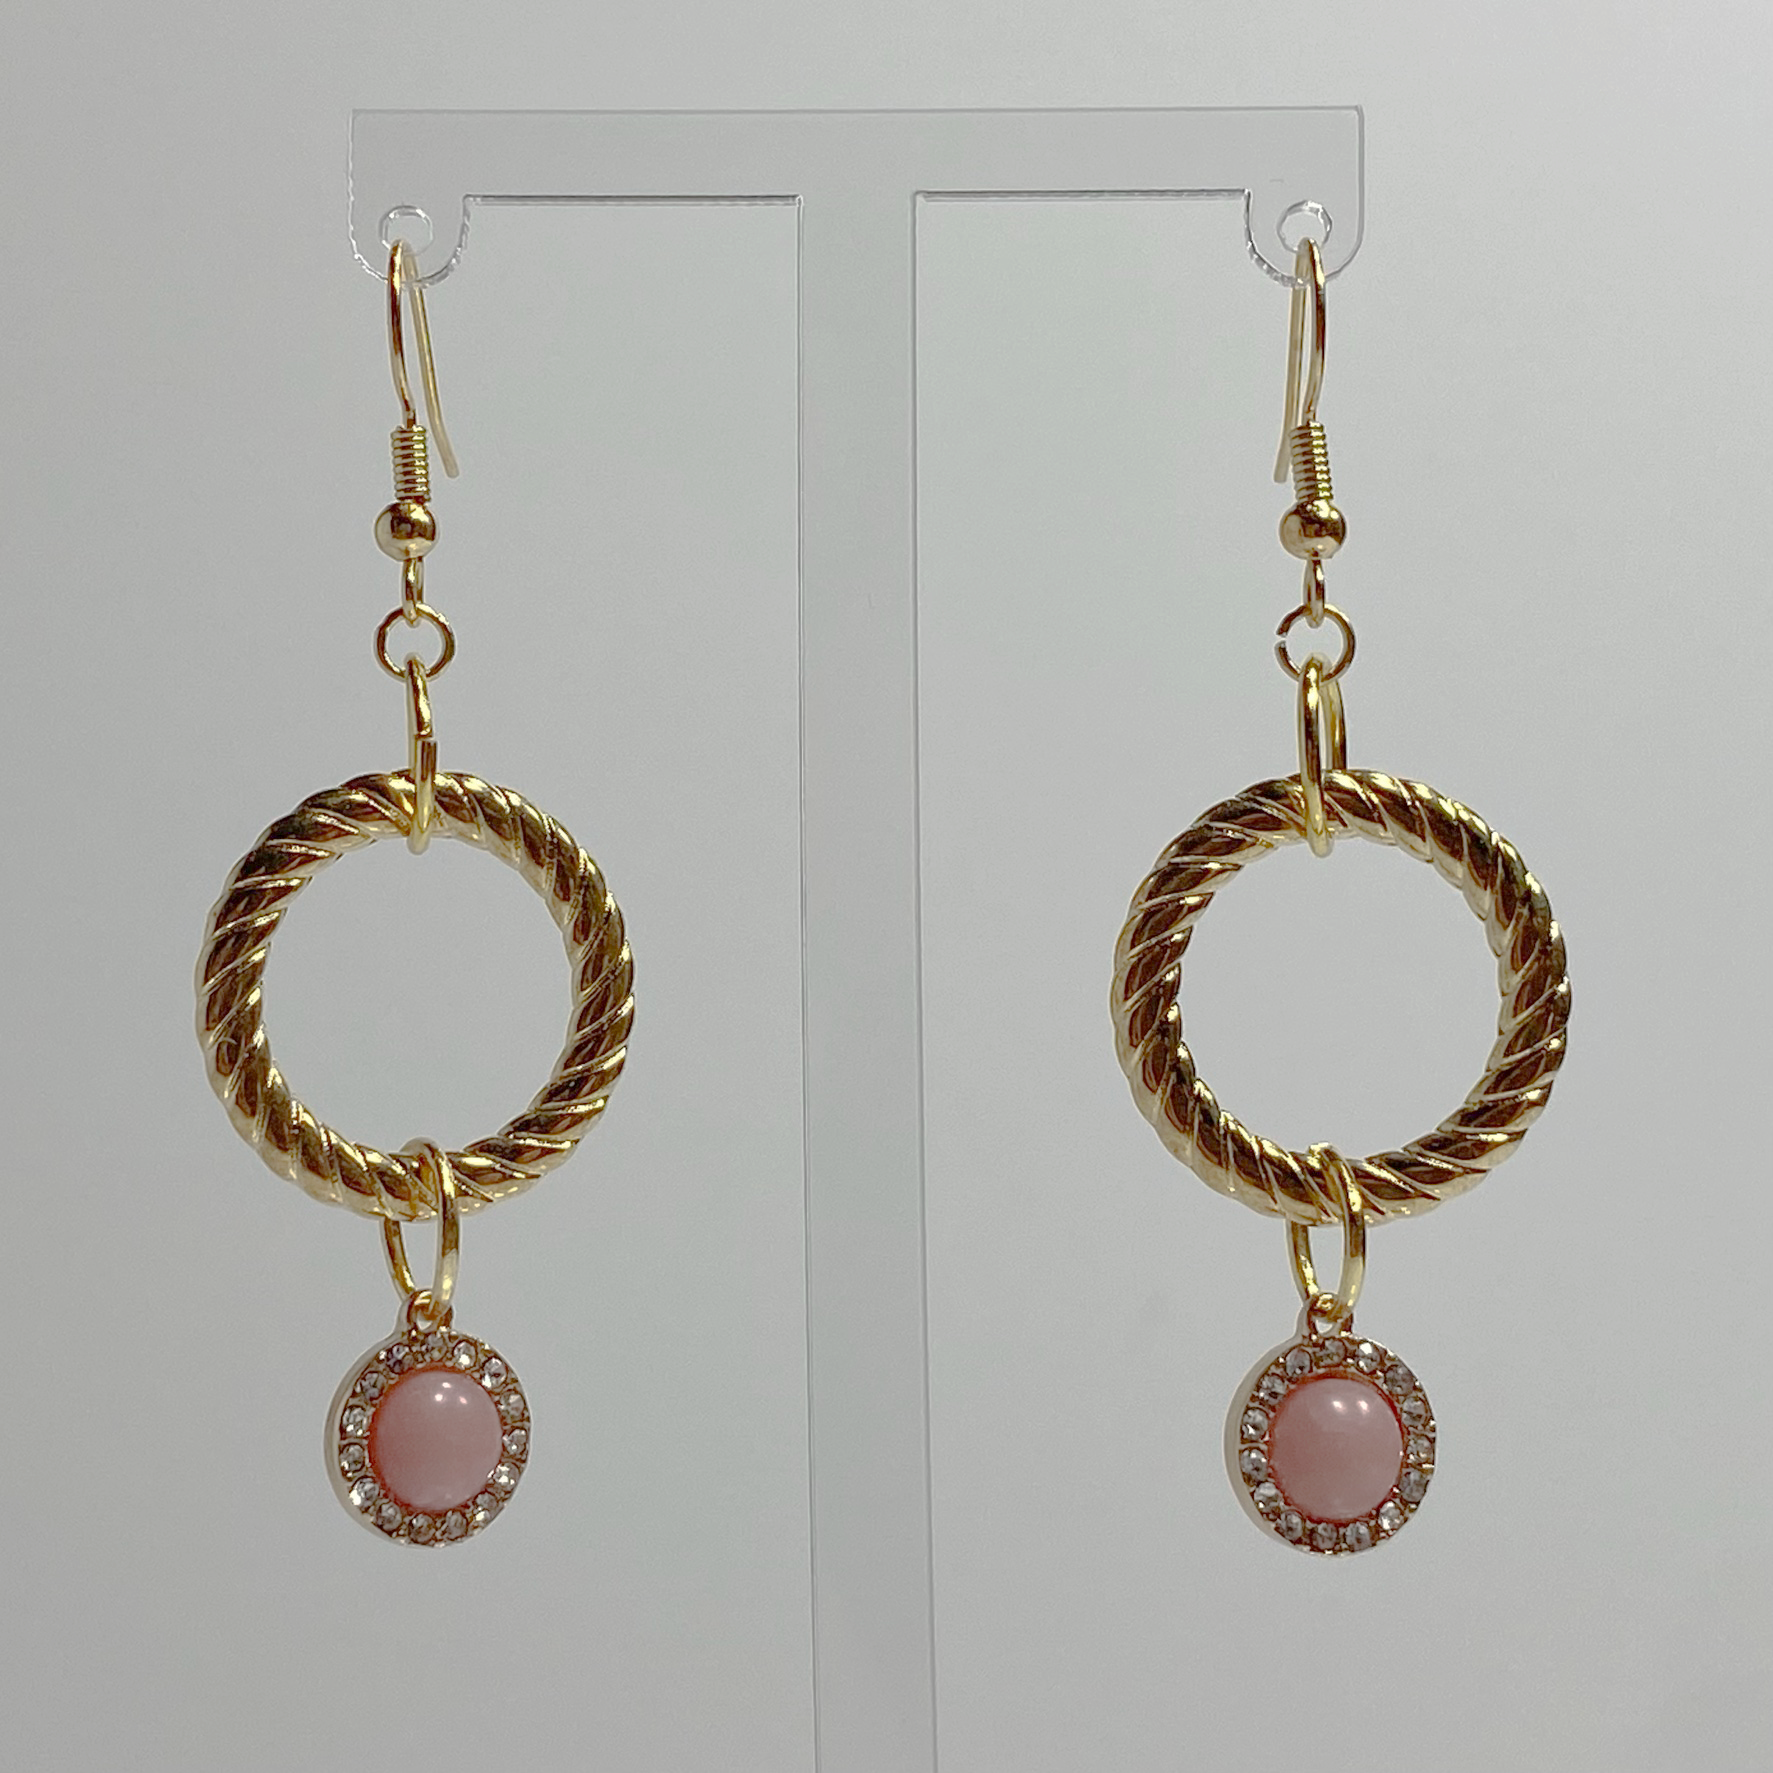 Gold-toned hanging earrings with a gold-plated hoop with a small with a hanging pink gem surrounded by white crystals.